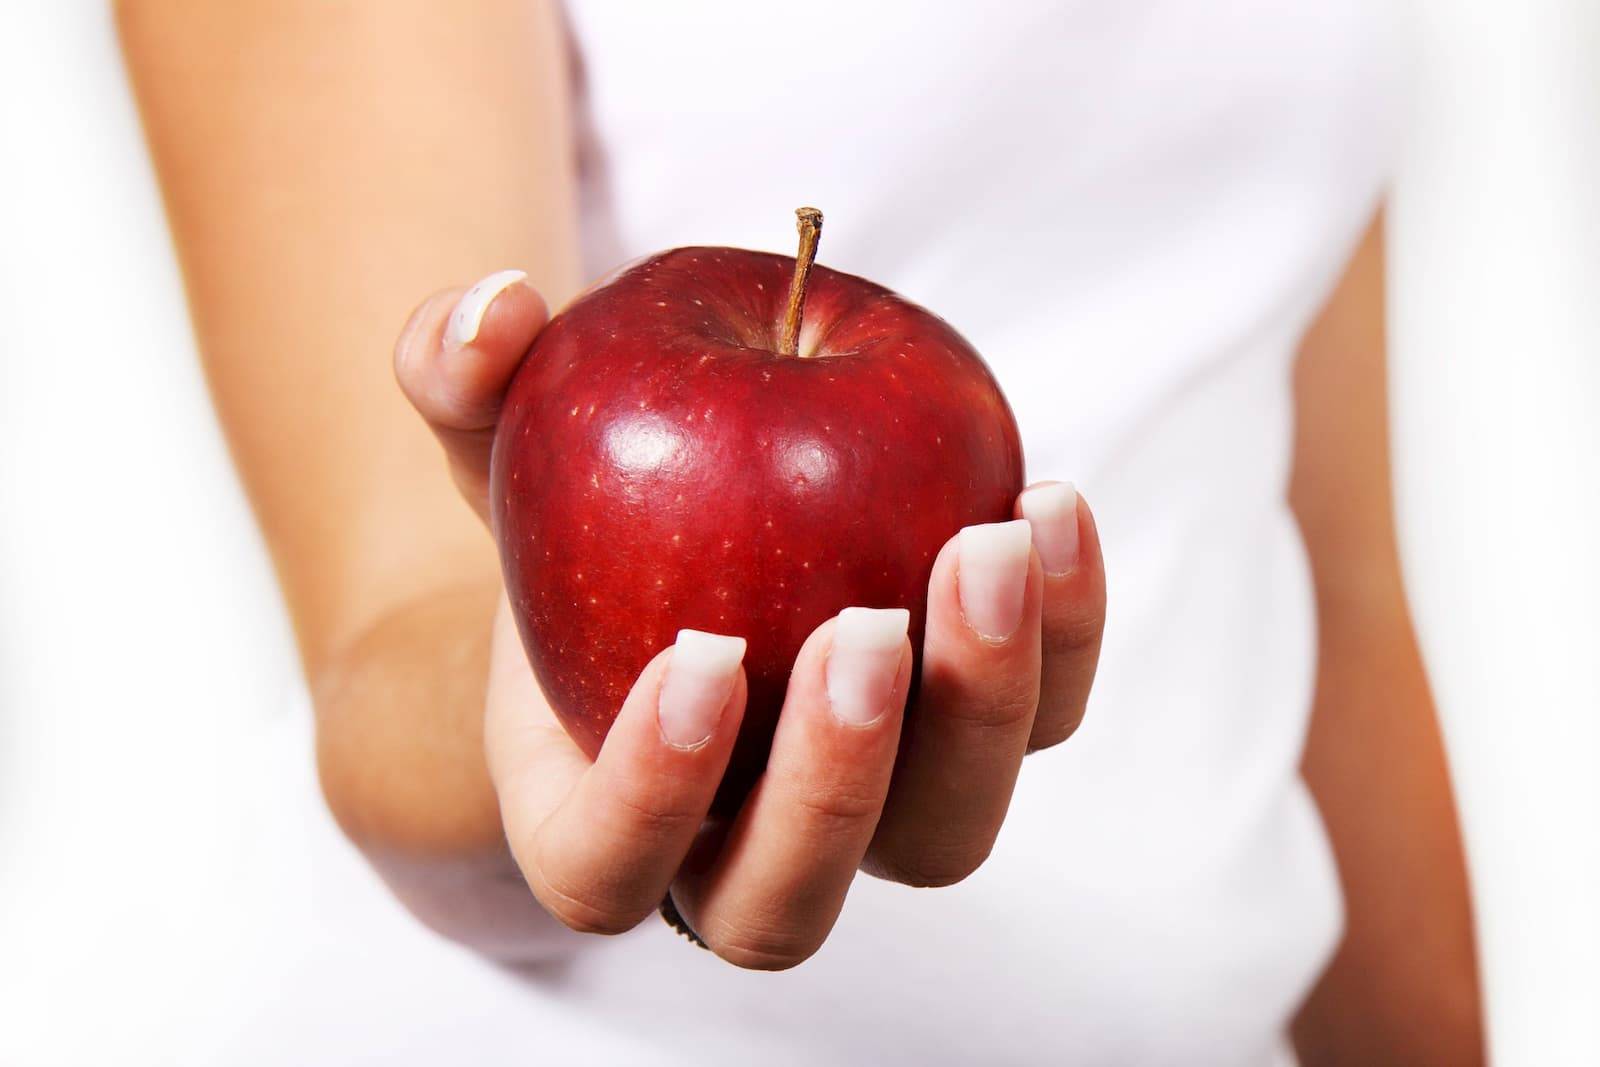 Can an apple a day keep the dermatologist away?